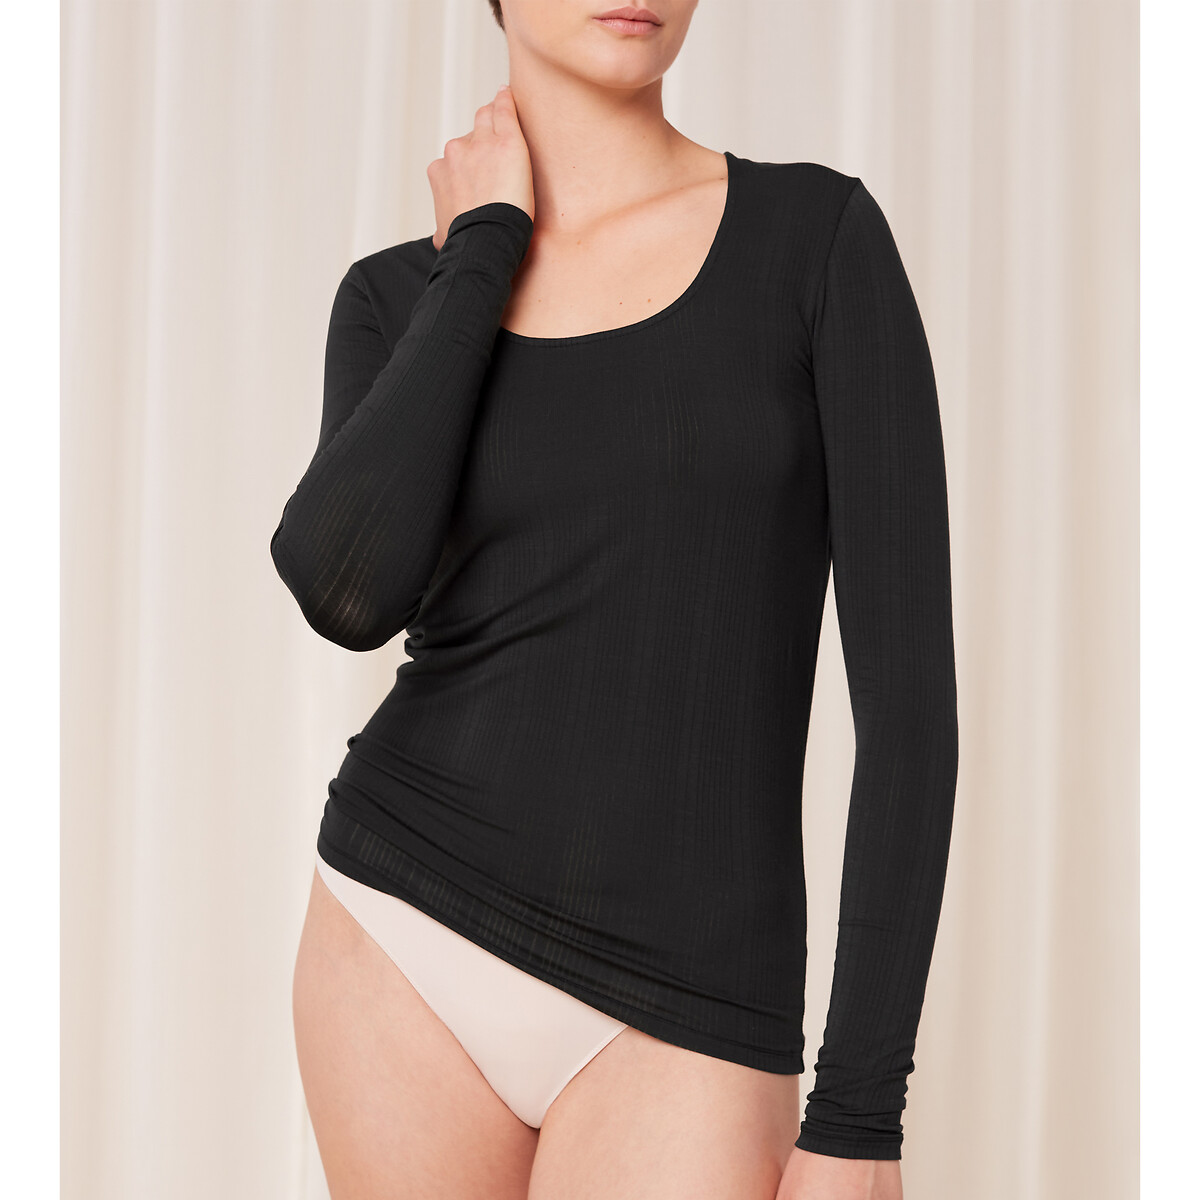 Image of Beauty Layers Top with Long Sleeves